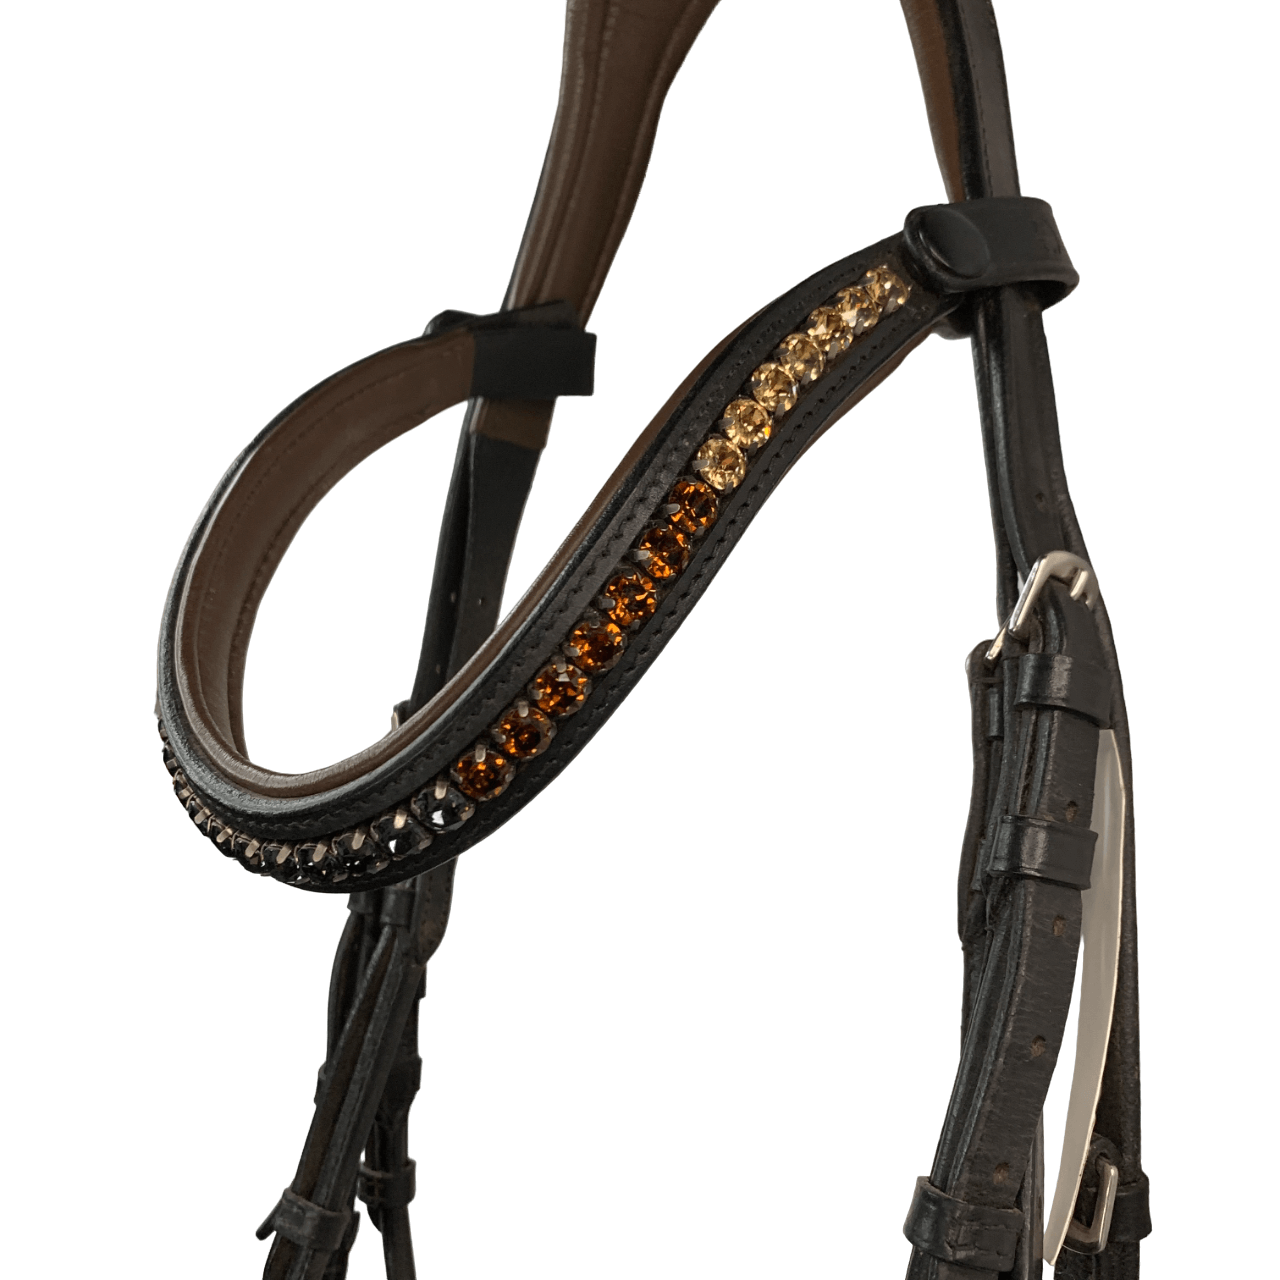 Halter Ego 'Macho' Anatomical Snaffle Bridle in Black - Extra-Full